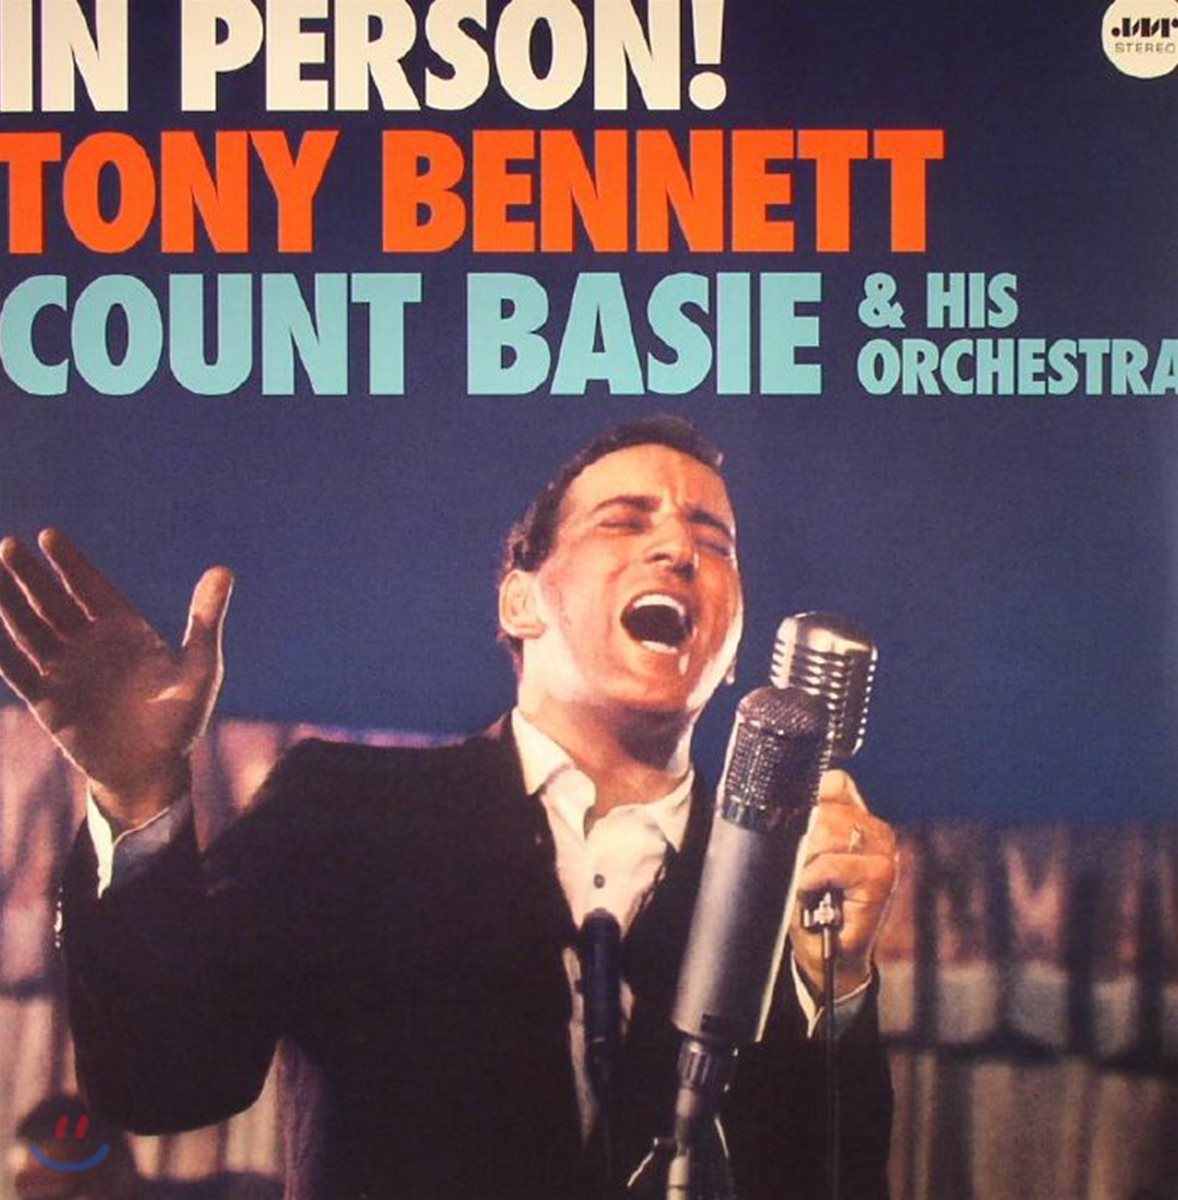 Tony Bennett / Count Basie Orchestra - In Person! [LP]